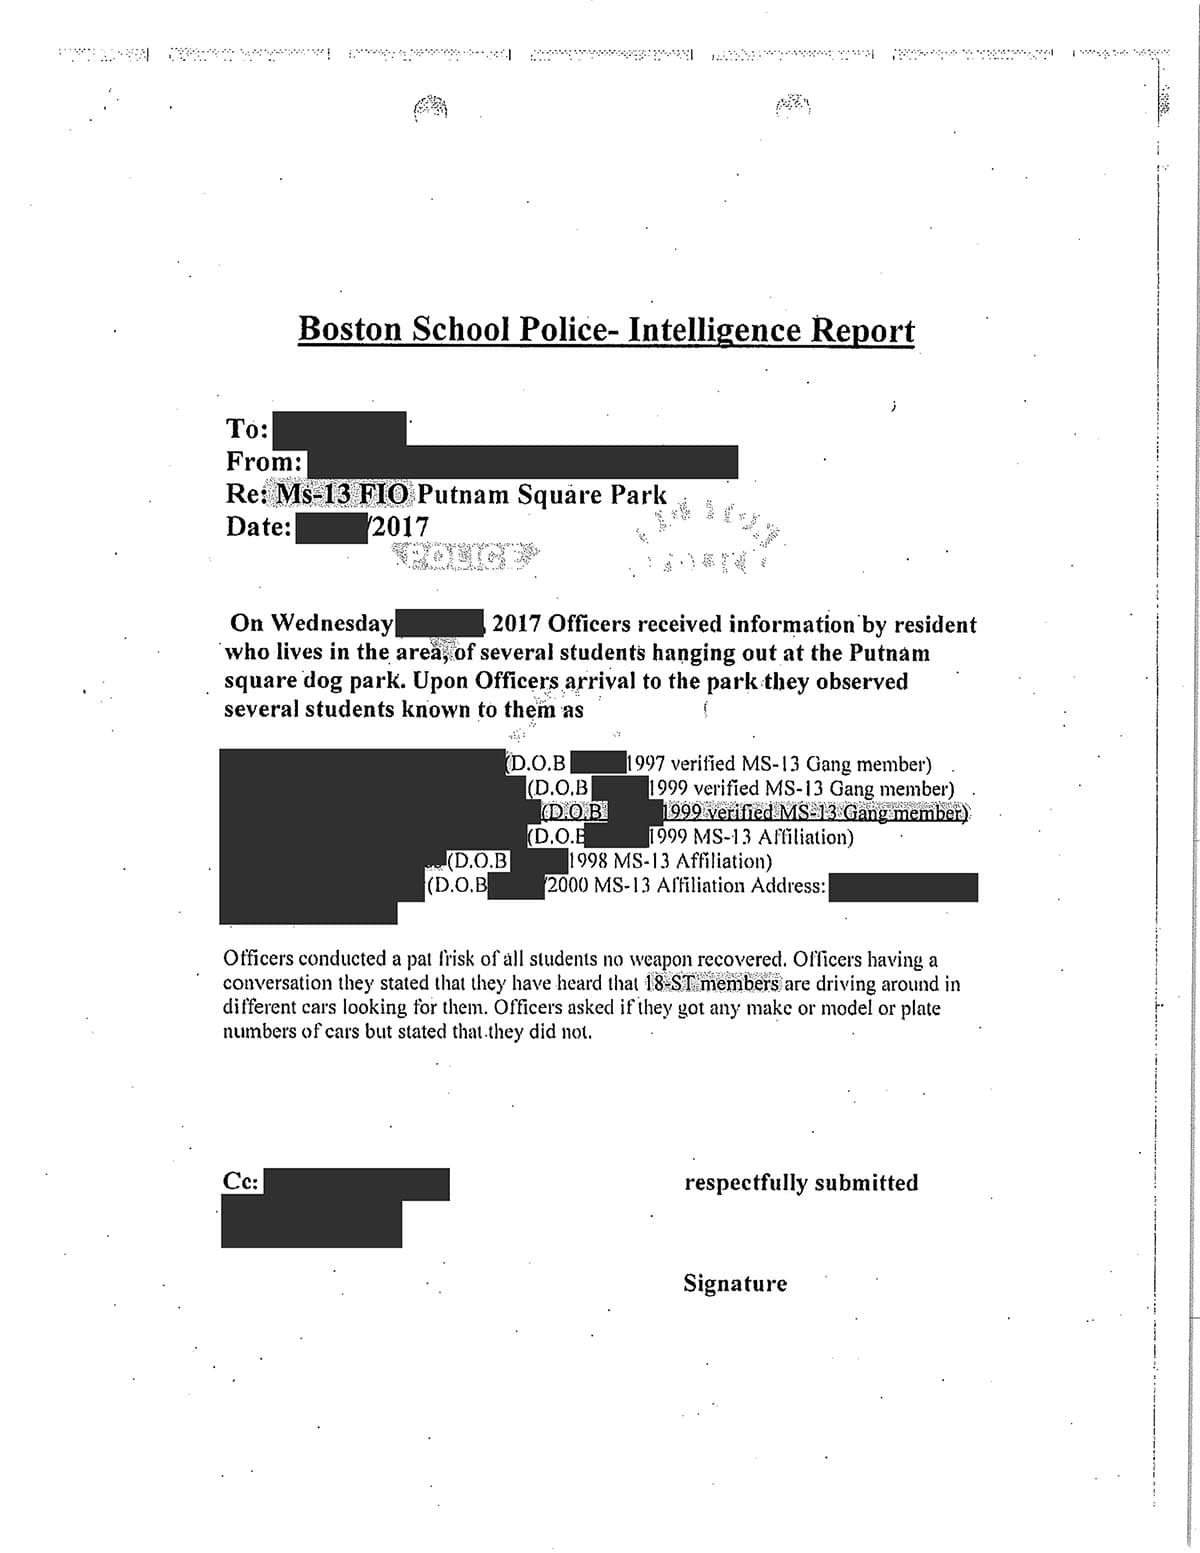 Boston School Police filed this so-called 'intelligence report' citing information they obtained during a &quot;pat frisk&quot; of students in East Boston that was conducted off school property. The report later appeared in immigration court as evidence for the federal government.